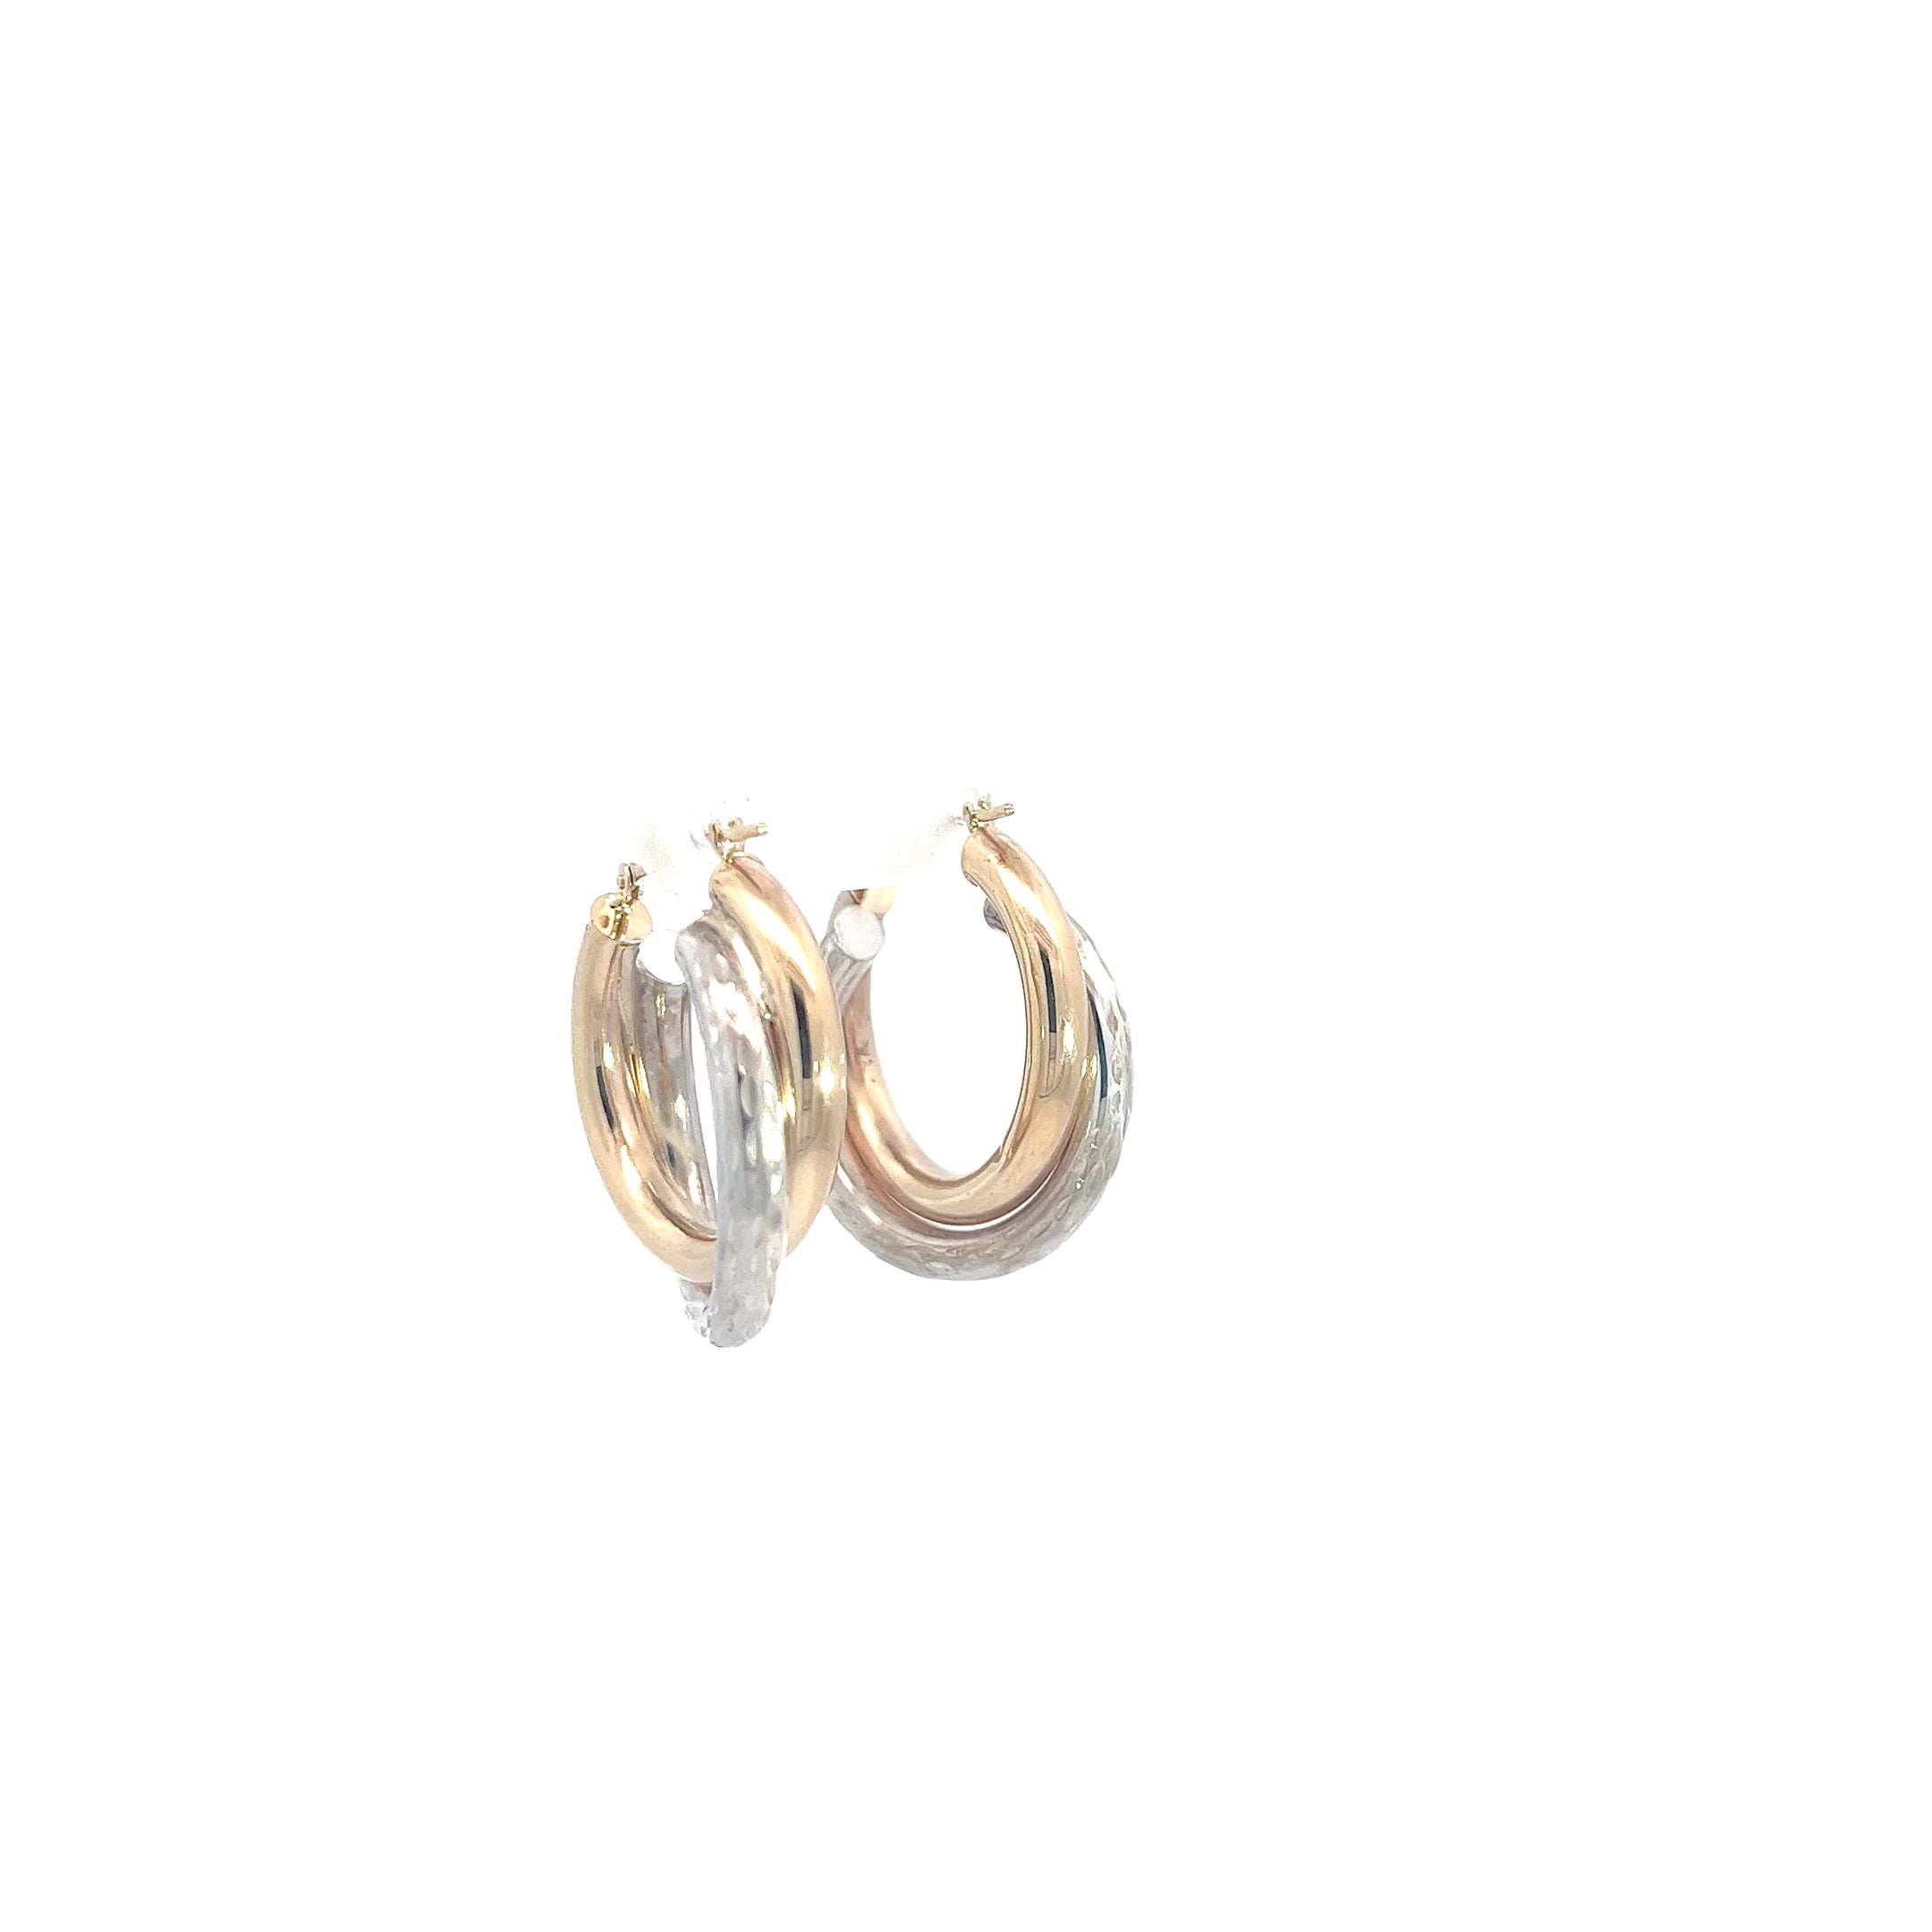 14K YELLOW GOLD AND STERLING SILVER 4 GRAM DOUBLE HOOPS 1 INCH